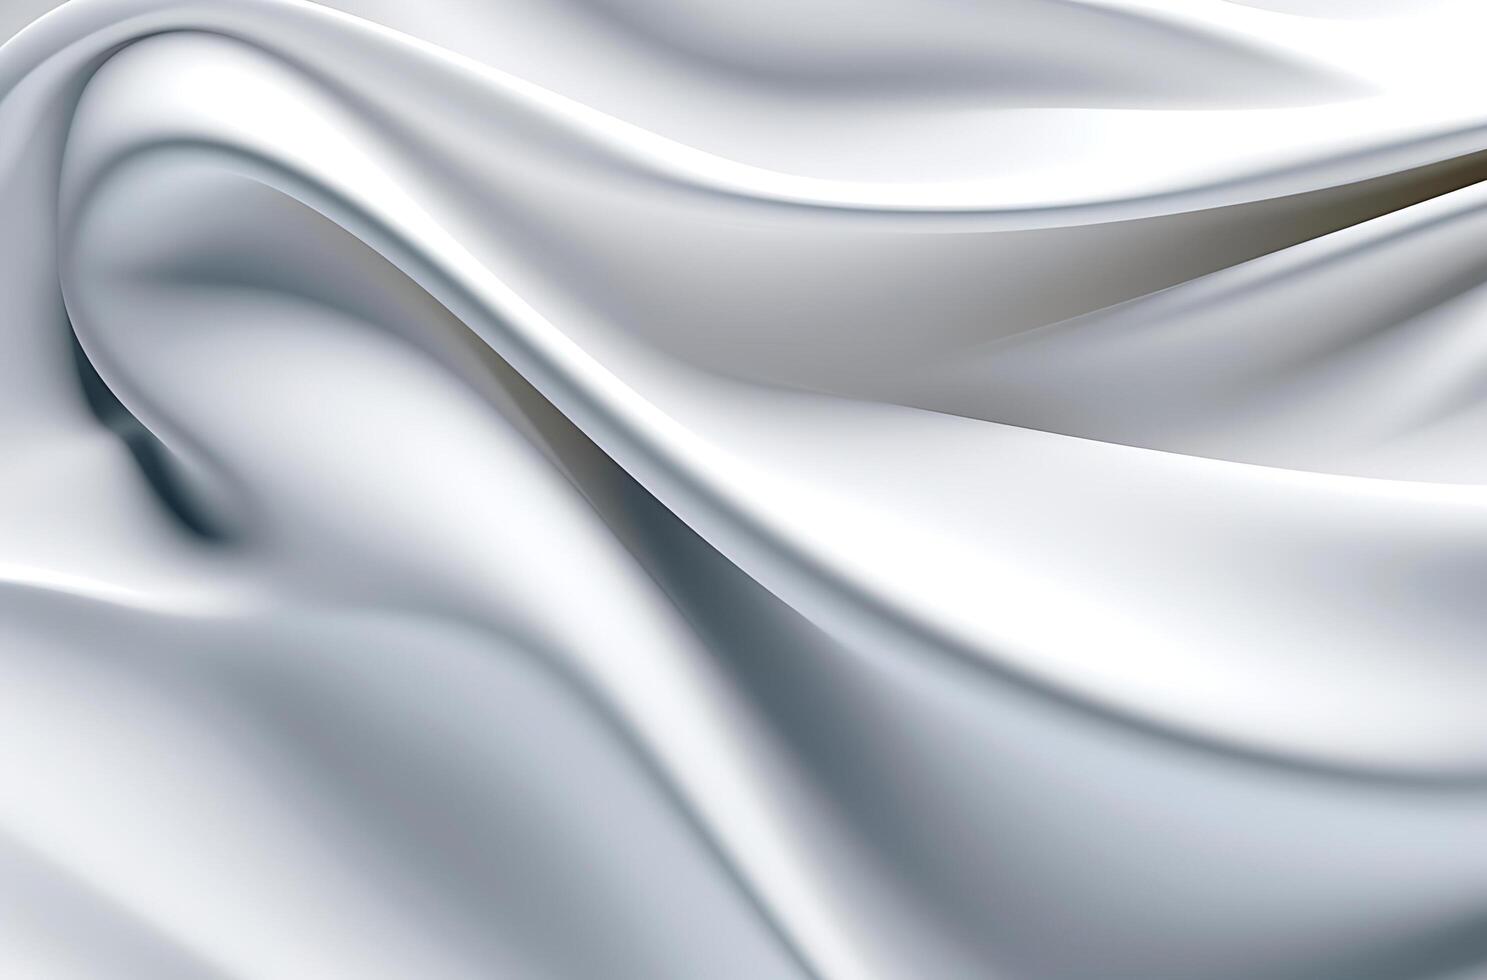 Abstract white grey glossy liquid Wave Background. photo